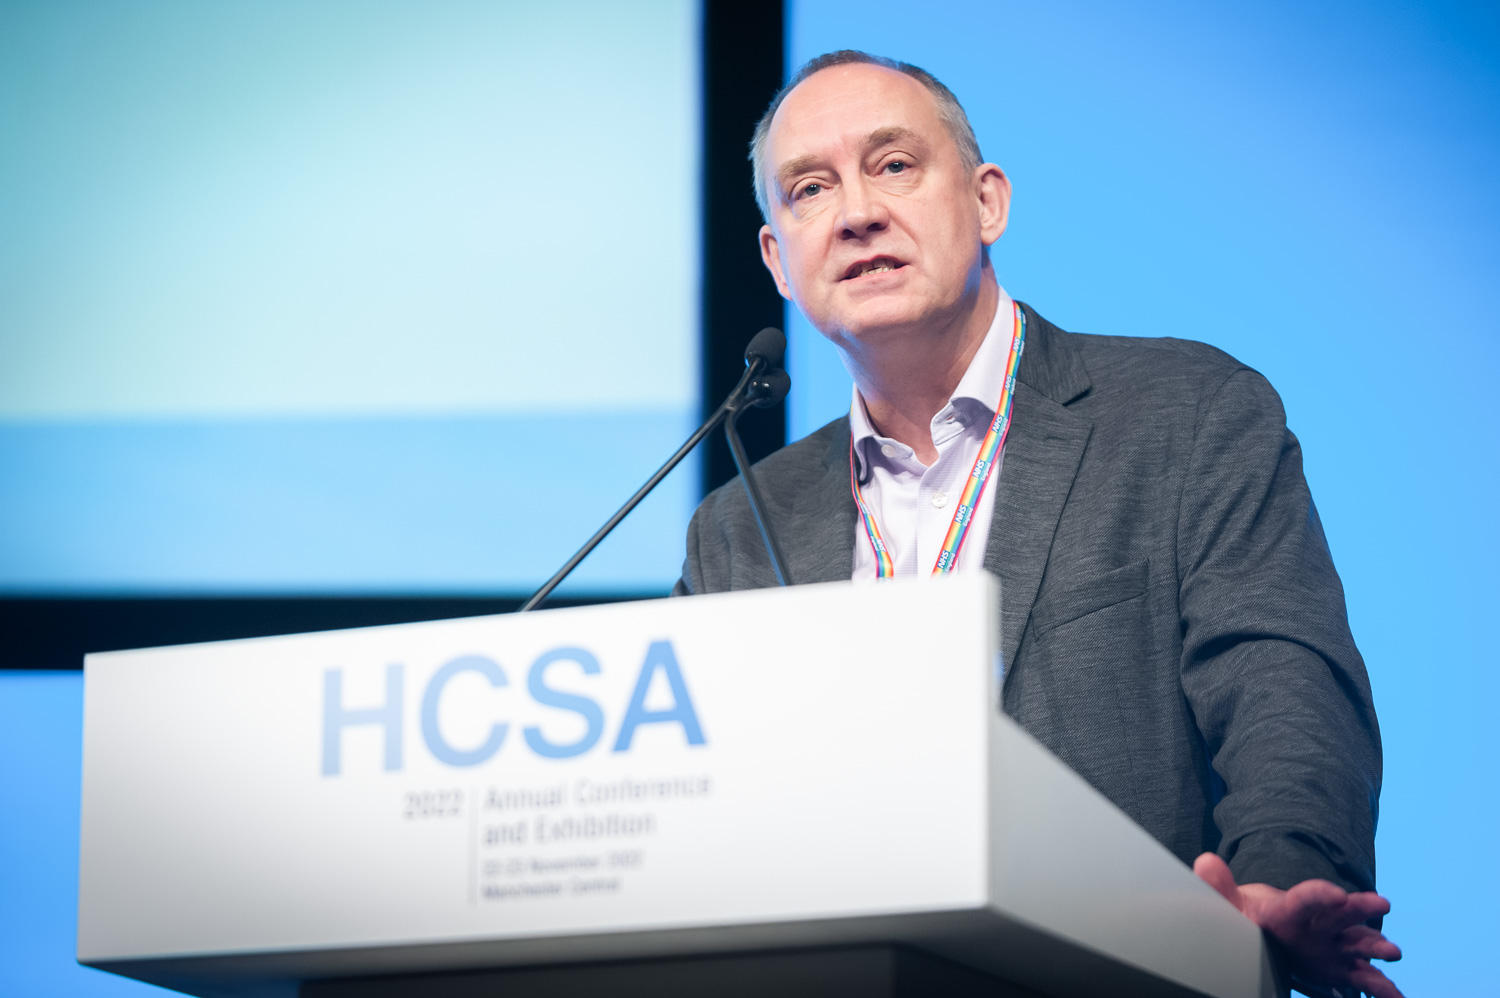 HCSA Conference – Annual NHS Procurement Conference and Exhibition